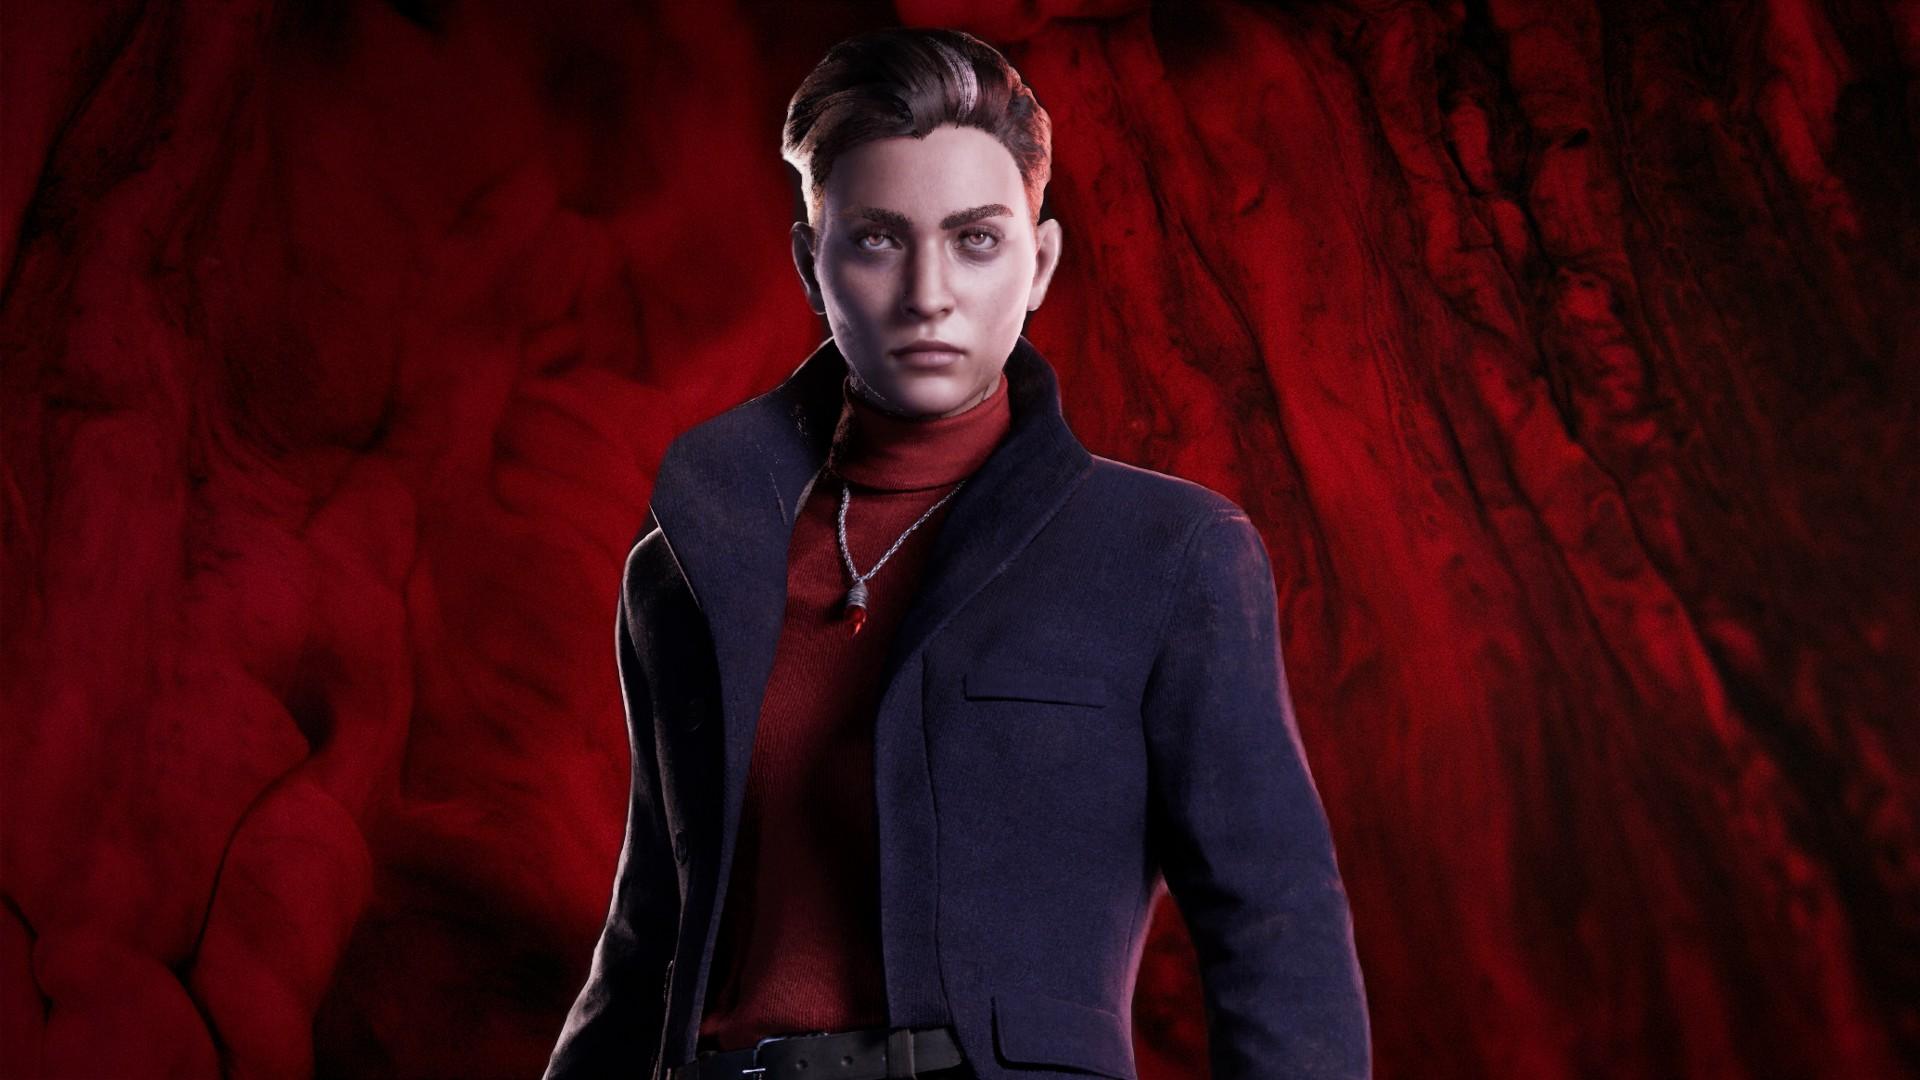 Meet Phyre, the protagonist of Vampire the Masquerade: Bloodlines